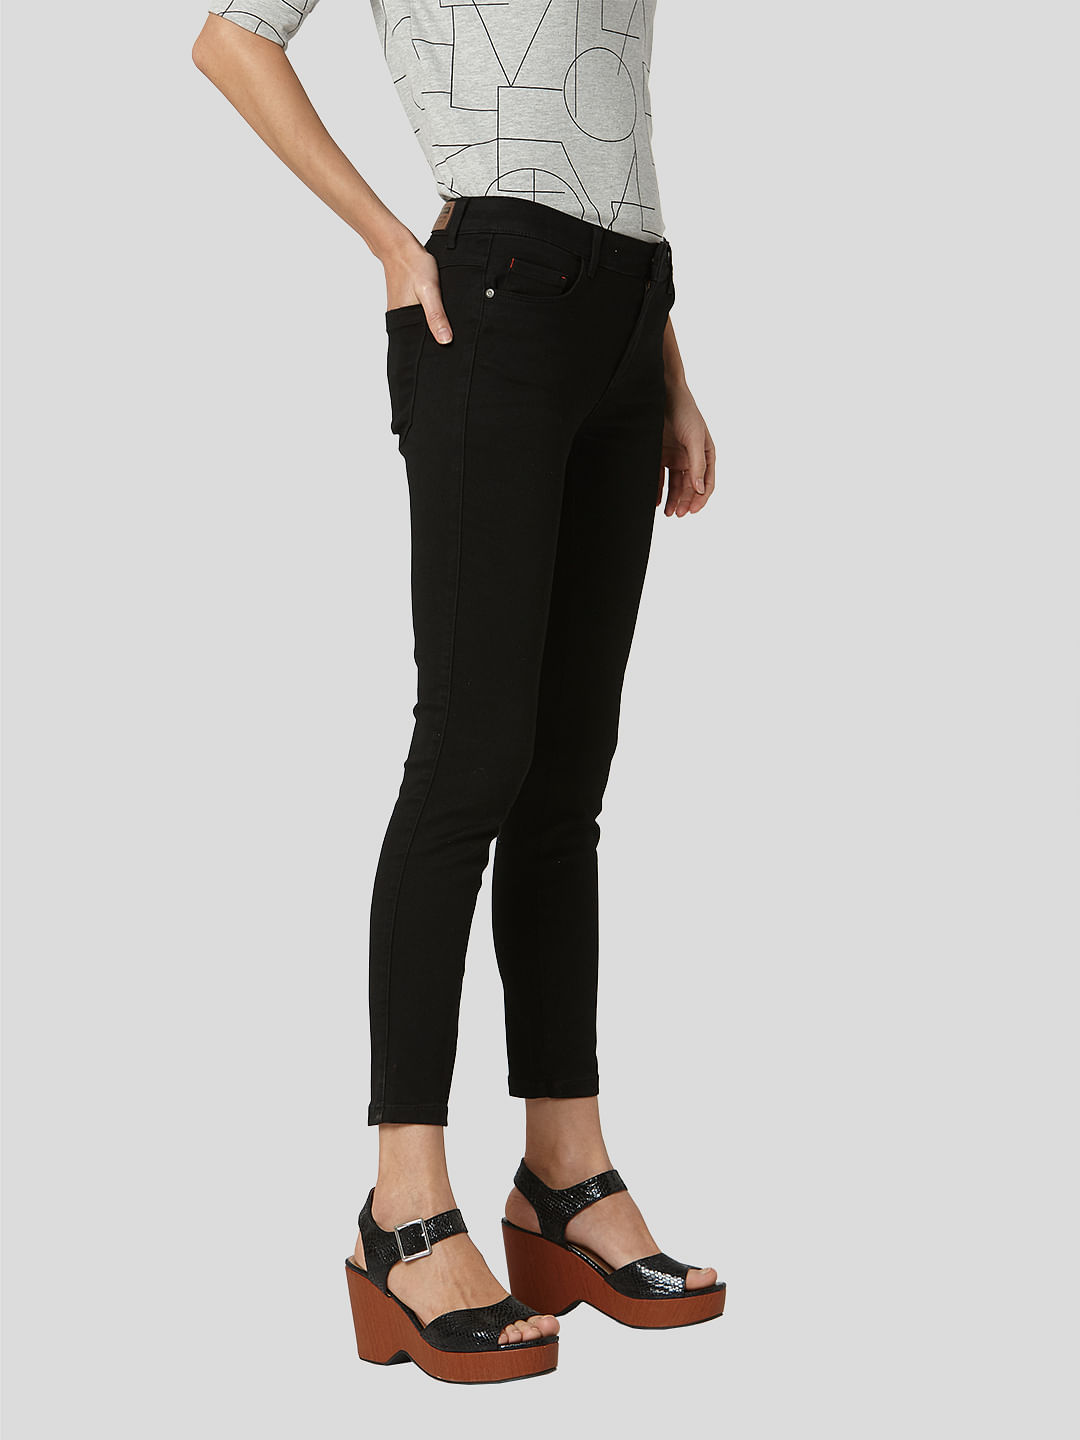 Retro Oversized Skinny Jeans With High Waist And Butt Lifting Design Sexy  Stretch Denim Denim Leggings For Women 211104 From Kong04, $17.11 |  DHgate.Com